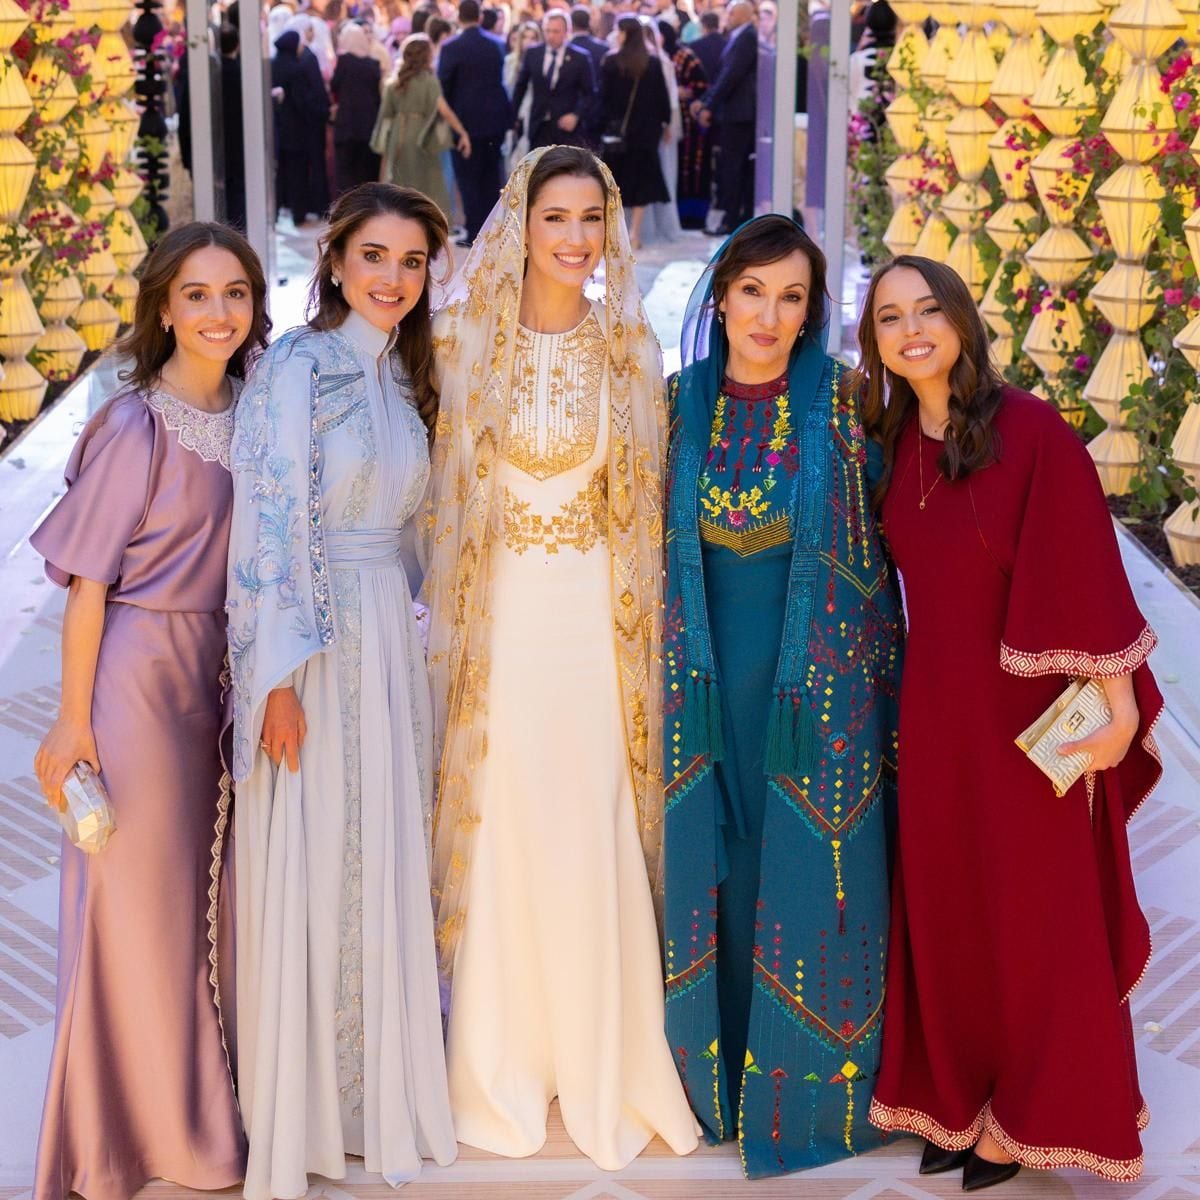 Rajwa (pictured with her mom and future royal in-laws) will marry the Crown Prince of Jordan on June 1. Hussein revealed at a forum organized by the Crown Prince Foundation that he met his future wife through an old friend from school. Rania's firstborn said, "I consider myself lucky because it is not every day you meet someone like Rajwa."